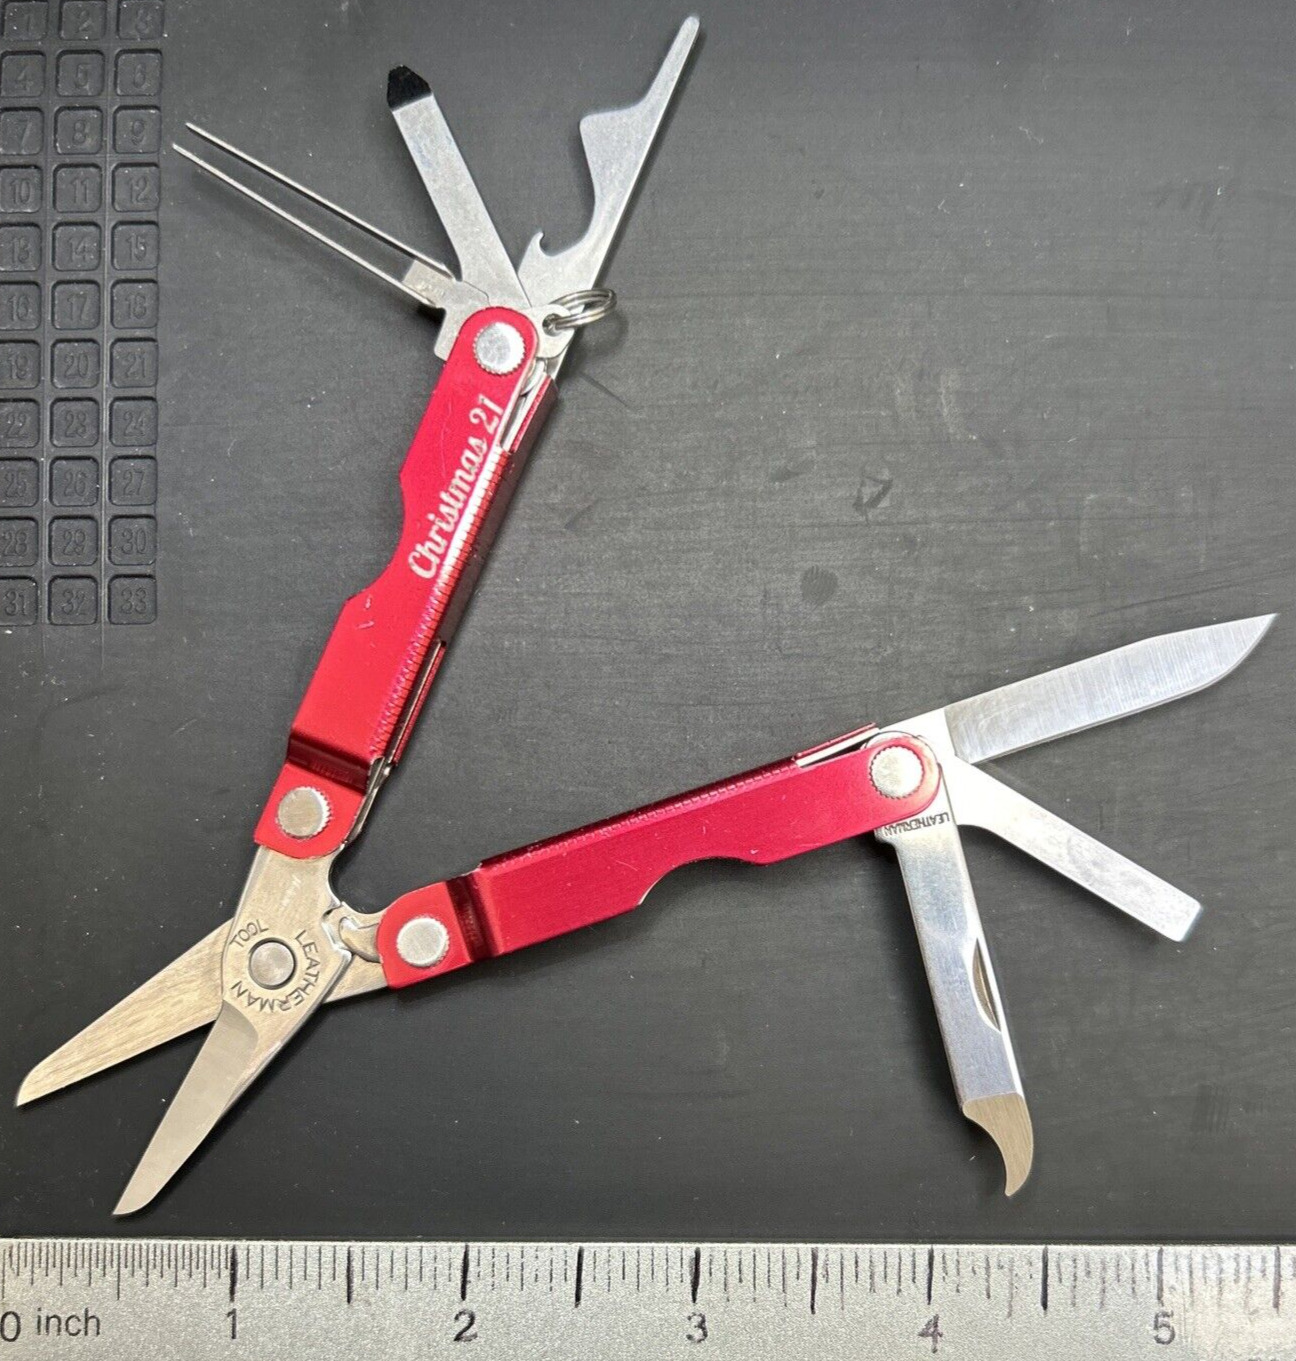 LEATHERMAN Micra Red Multi-Tool Knife, Scissors & More VERY GOOD USED Condition